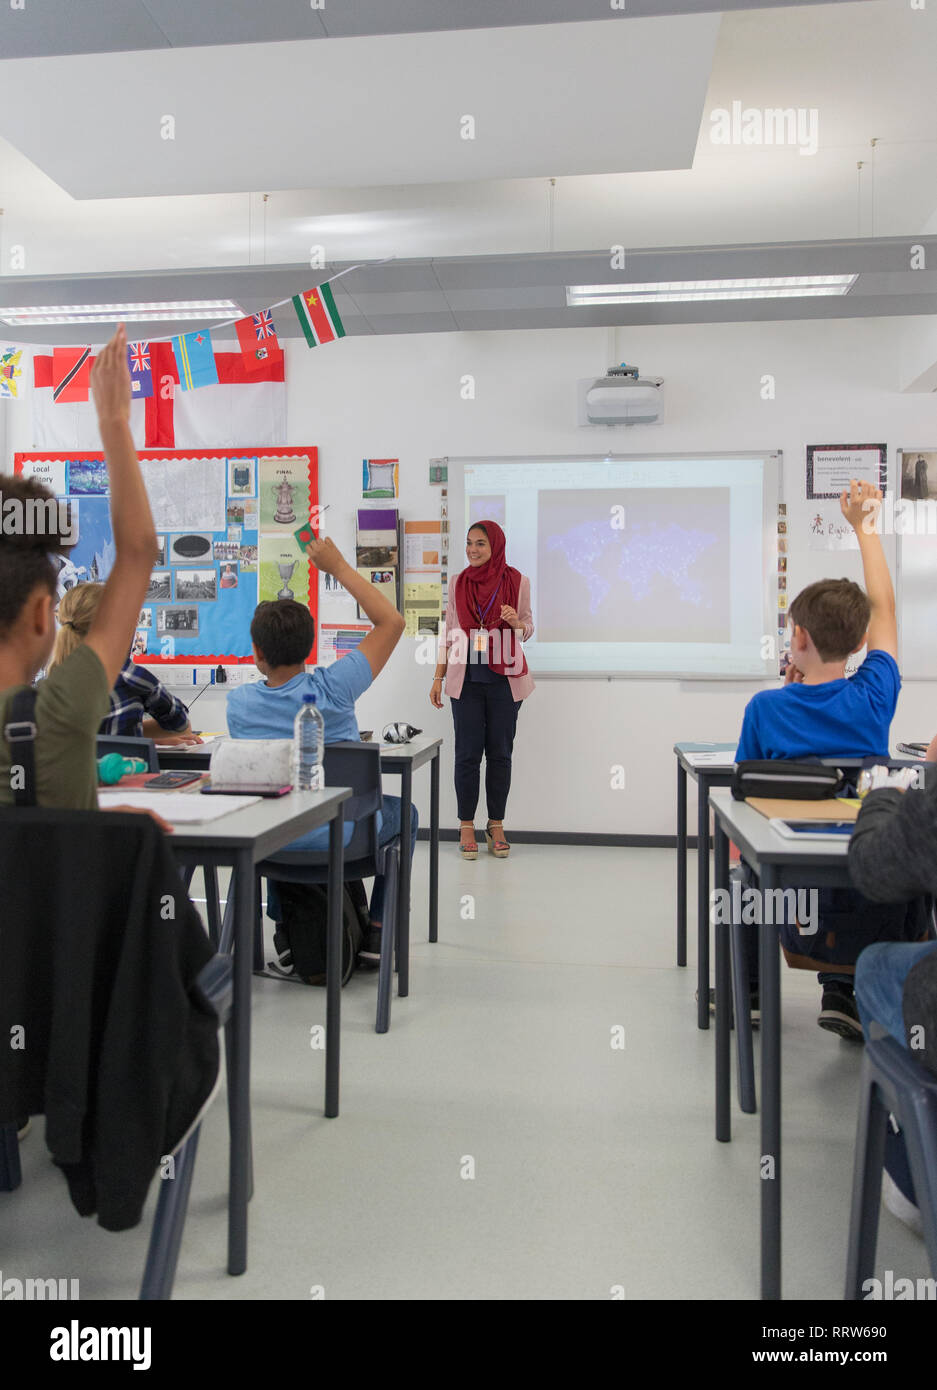 Female teacher in hijab answering student questions in classroom Stock Photo